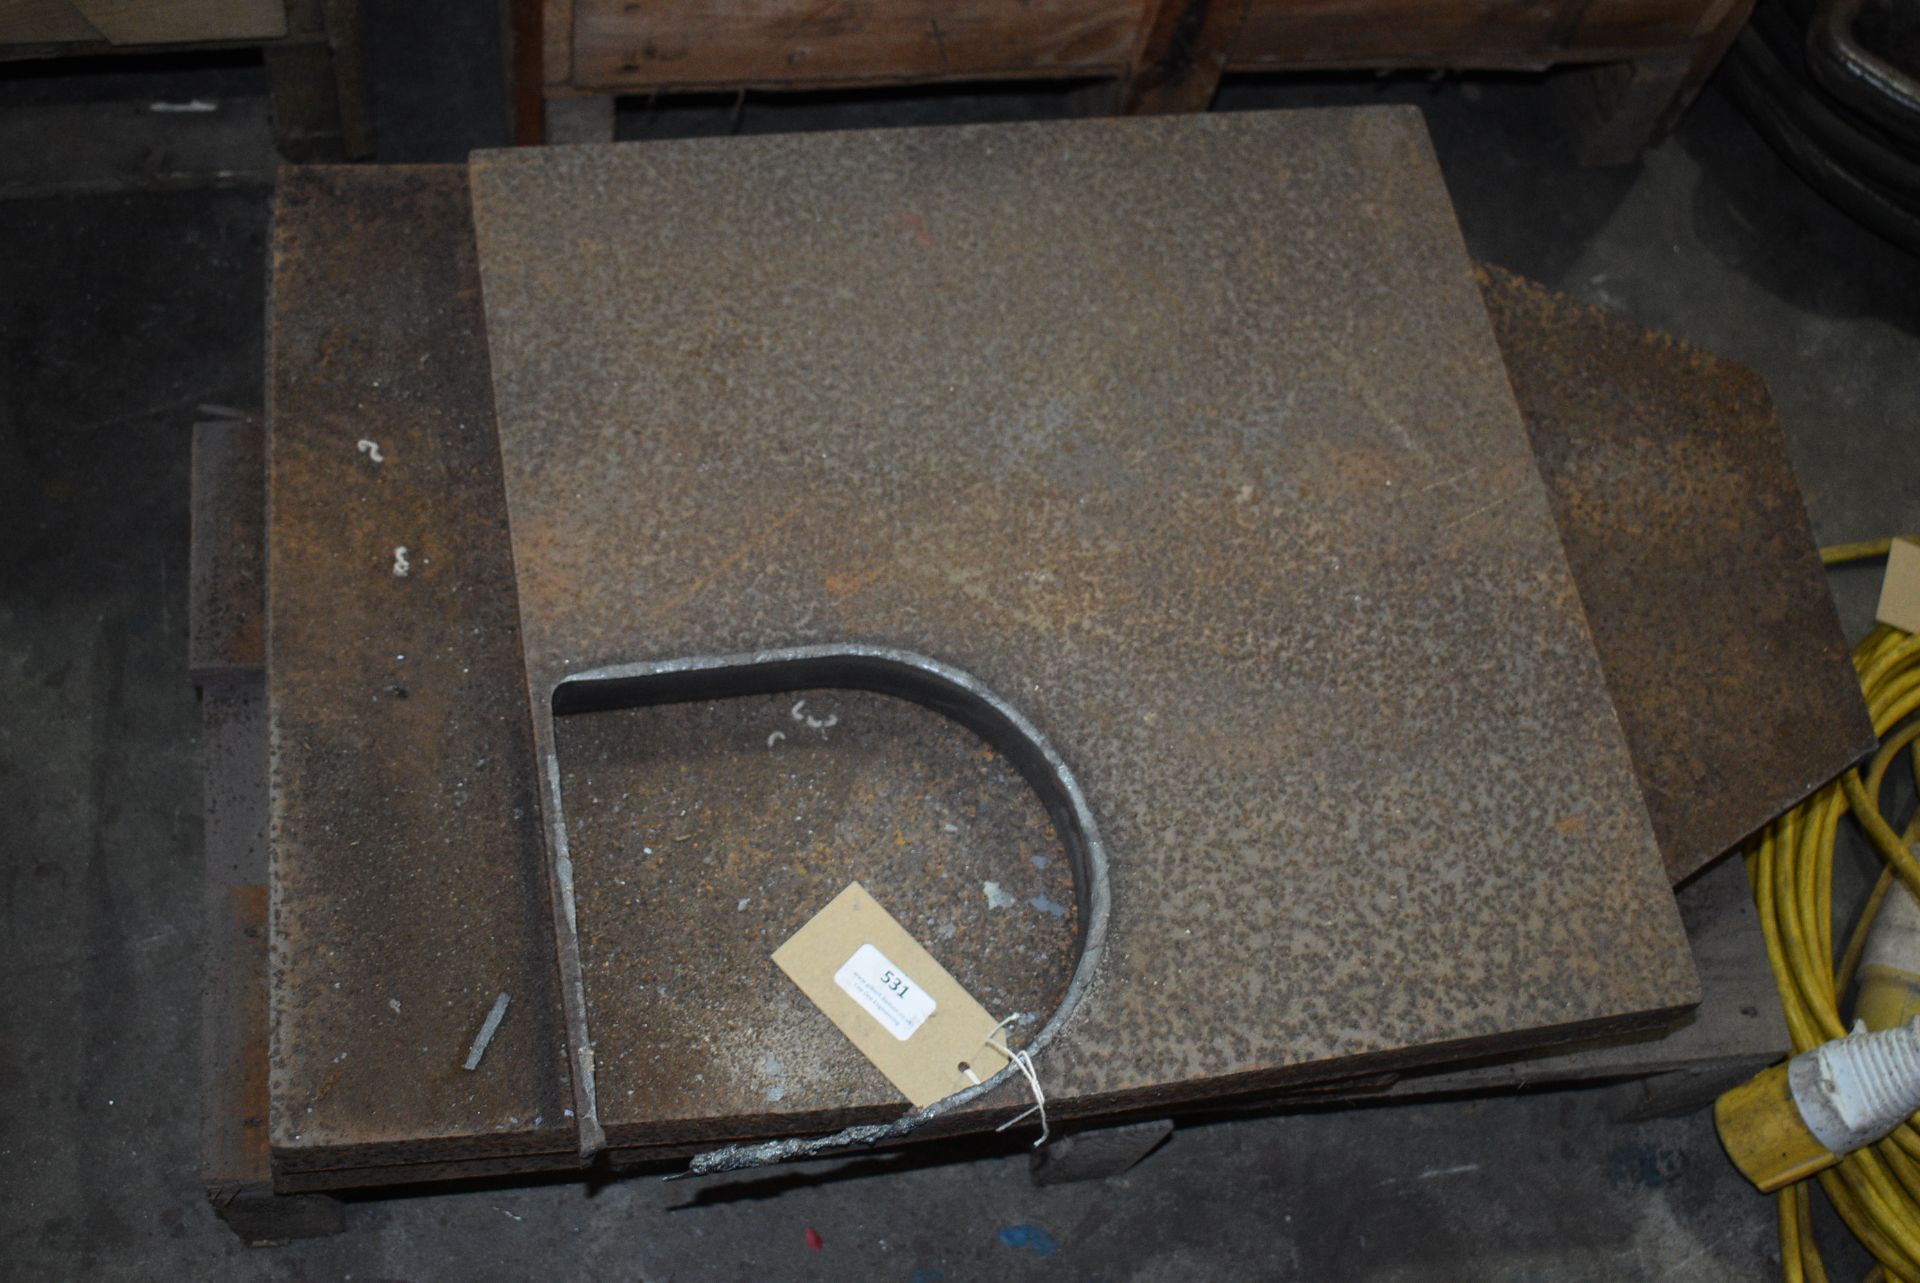 *Plate Heavy Duty 40mm Thick